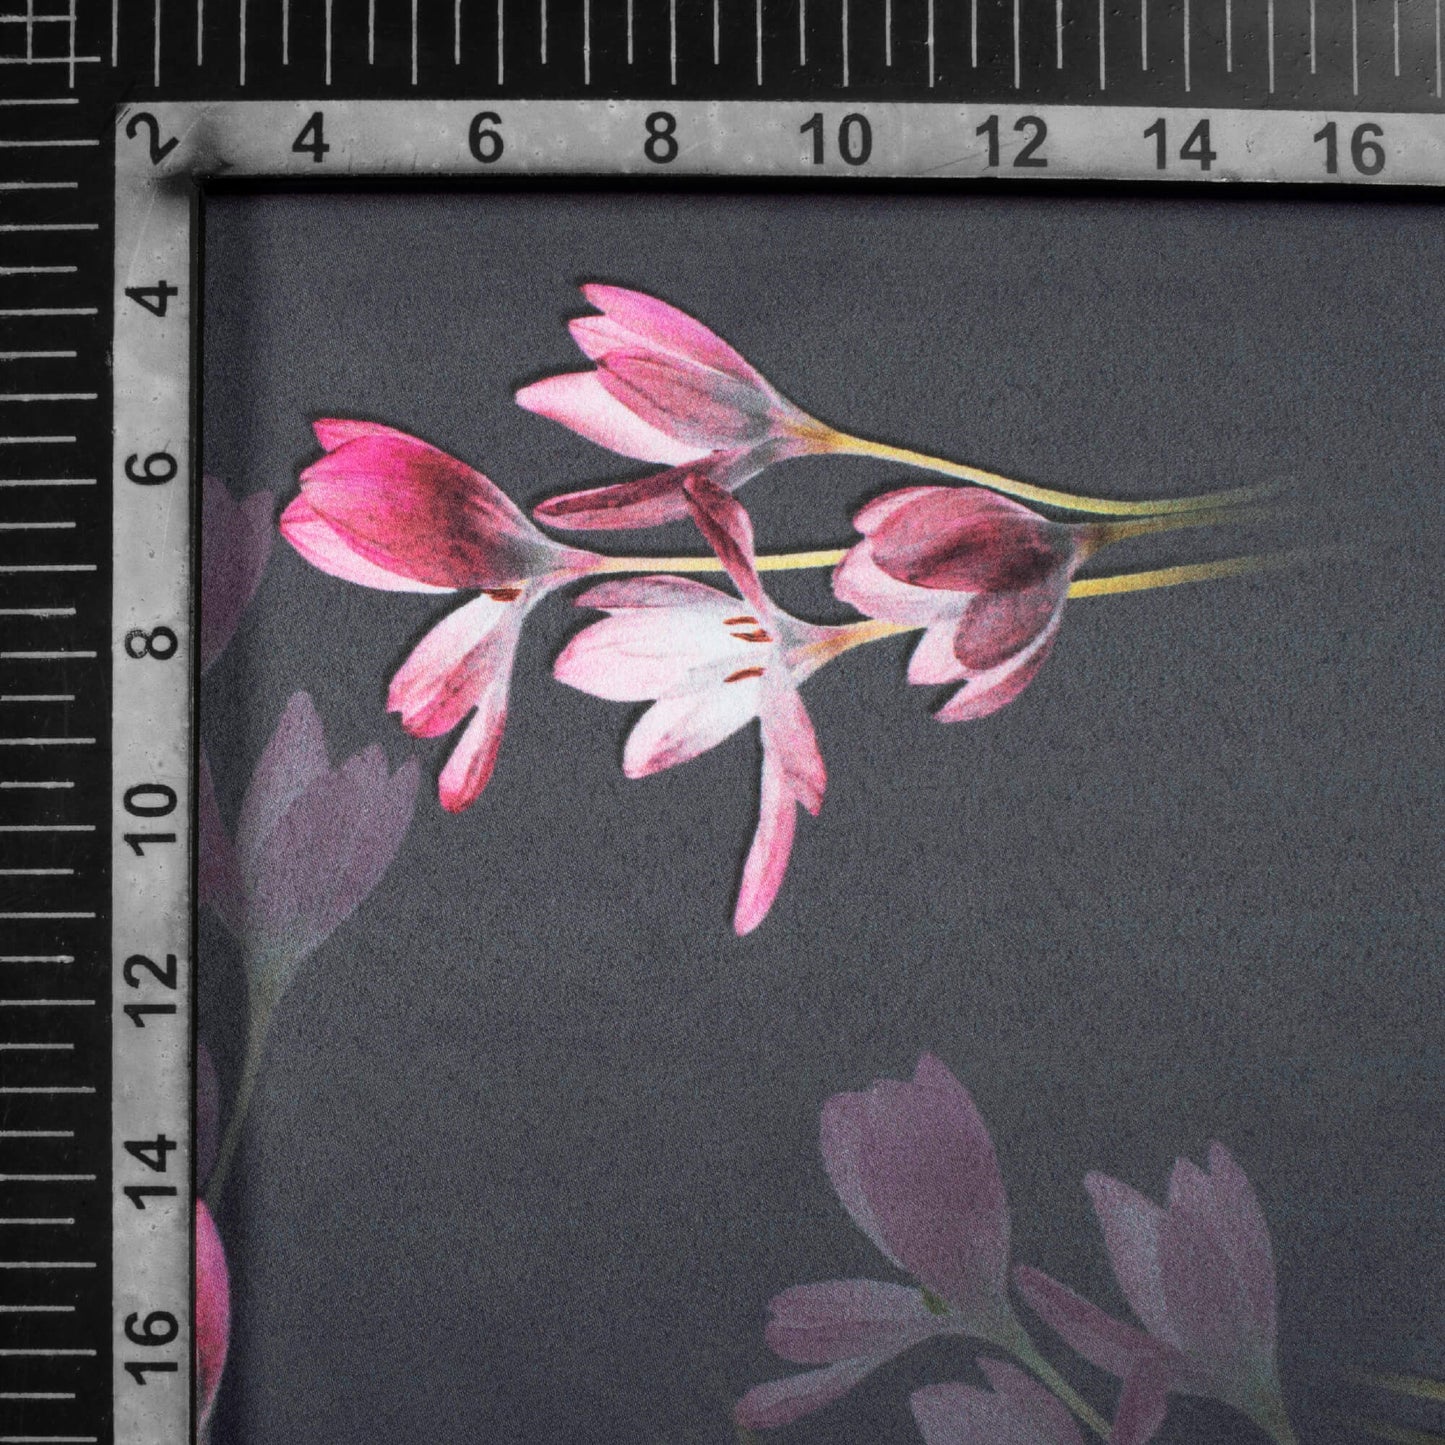 Black And Punch Pink Floral Pattern Digital Print Charmeuse Satin Fabric (Width 58 Inches)